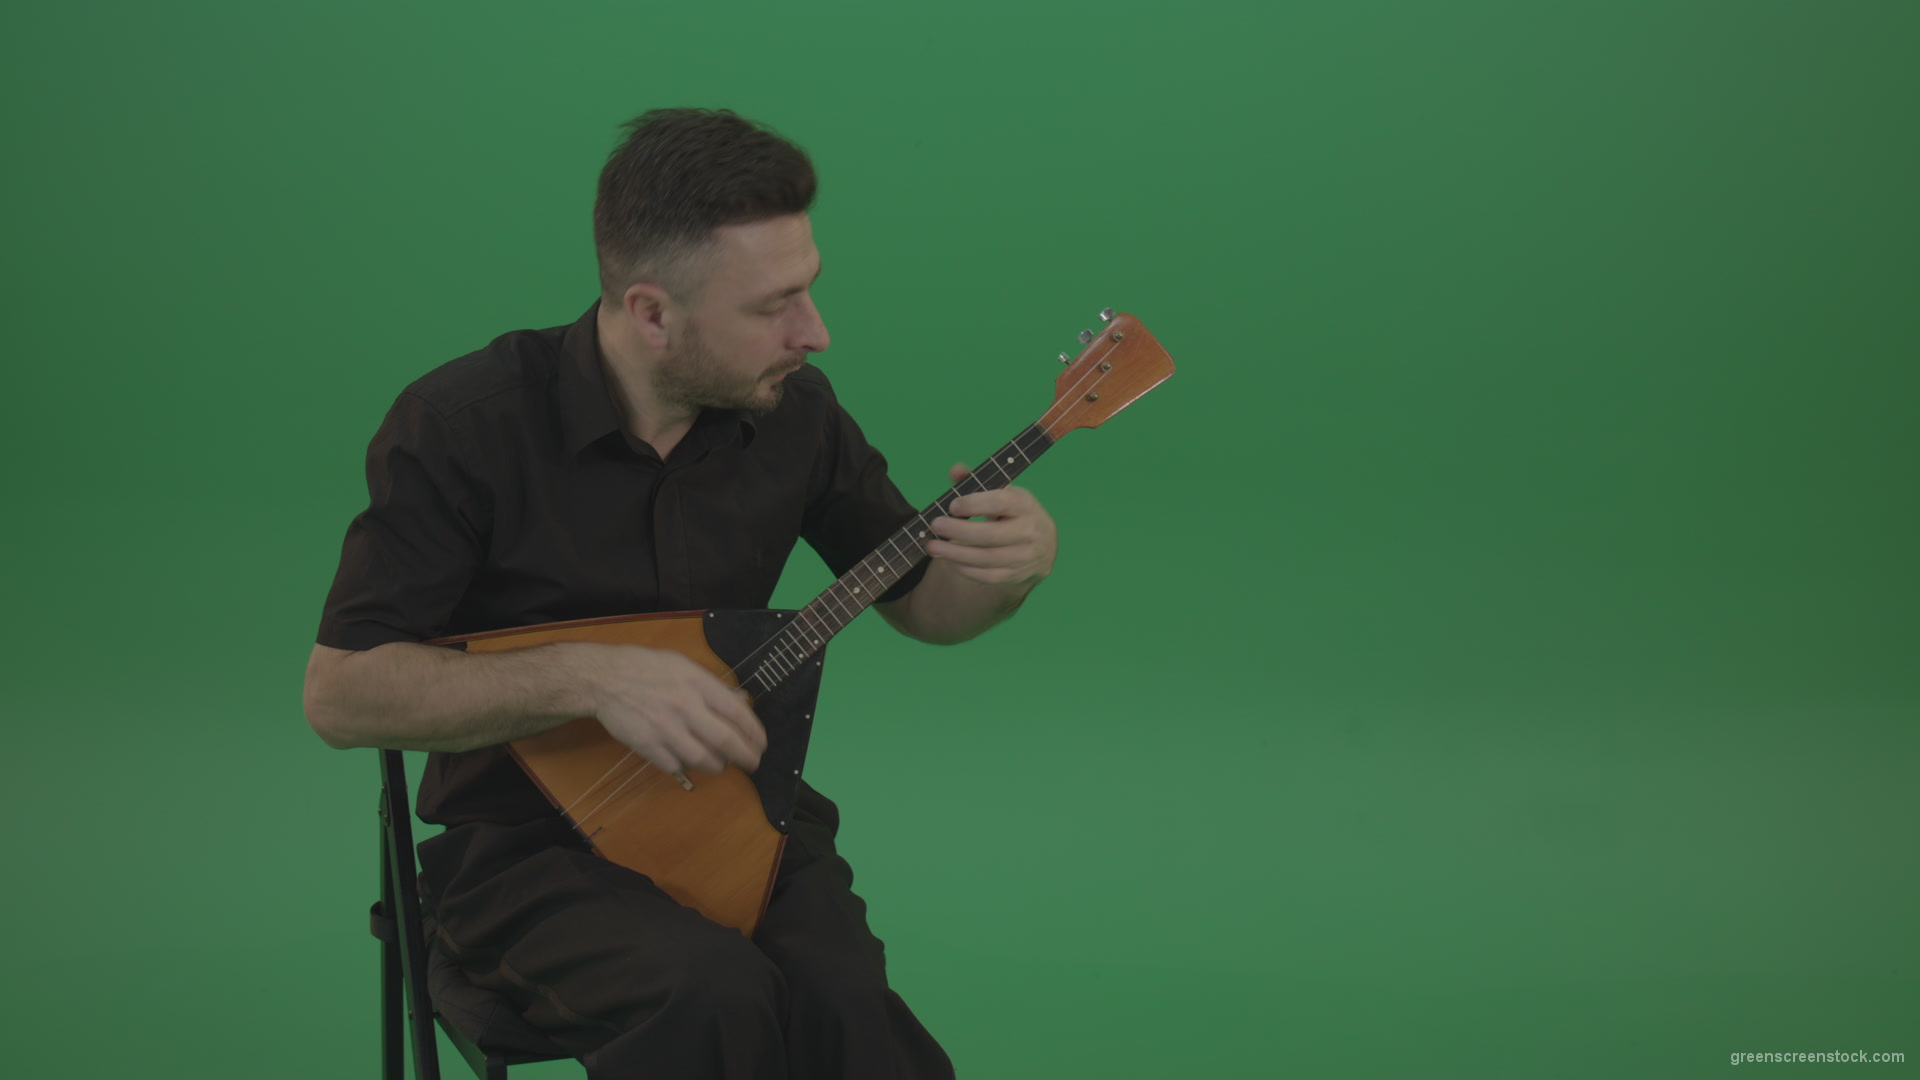 Funny-Balalaika-music-player-in-black-wear-playing-in-wedding-isolated-on-green-screen-background_008 Green Screen Stock